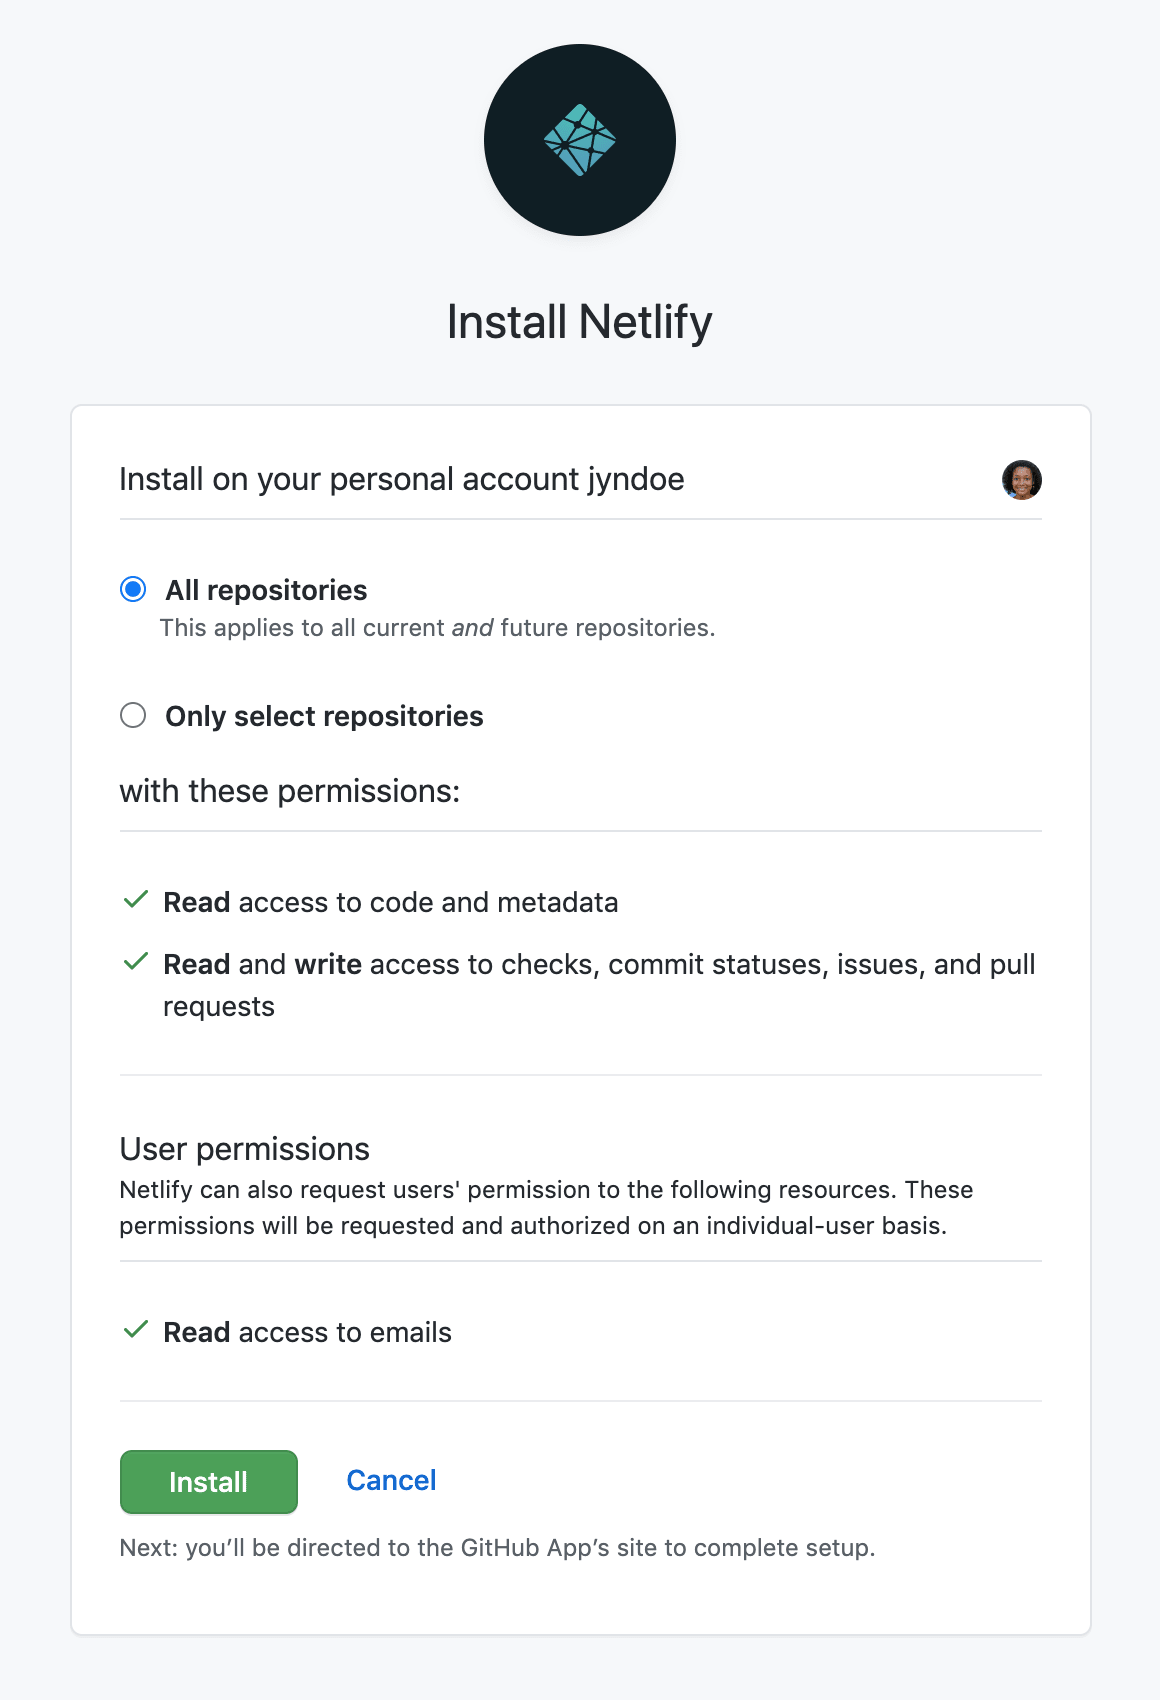 GitHub’s prompt to install the Netlify app, including permissions, and options to select repositories.